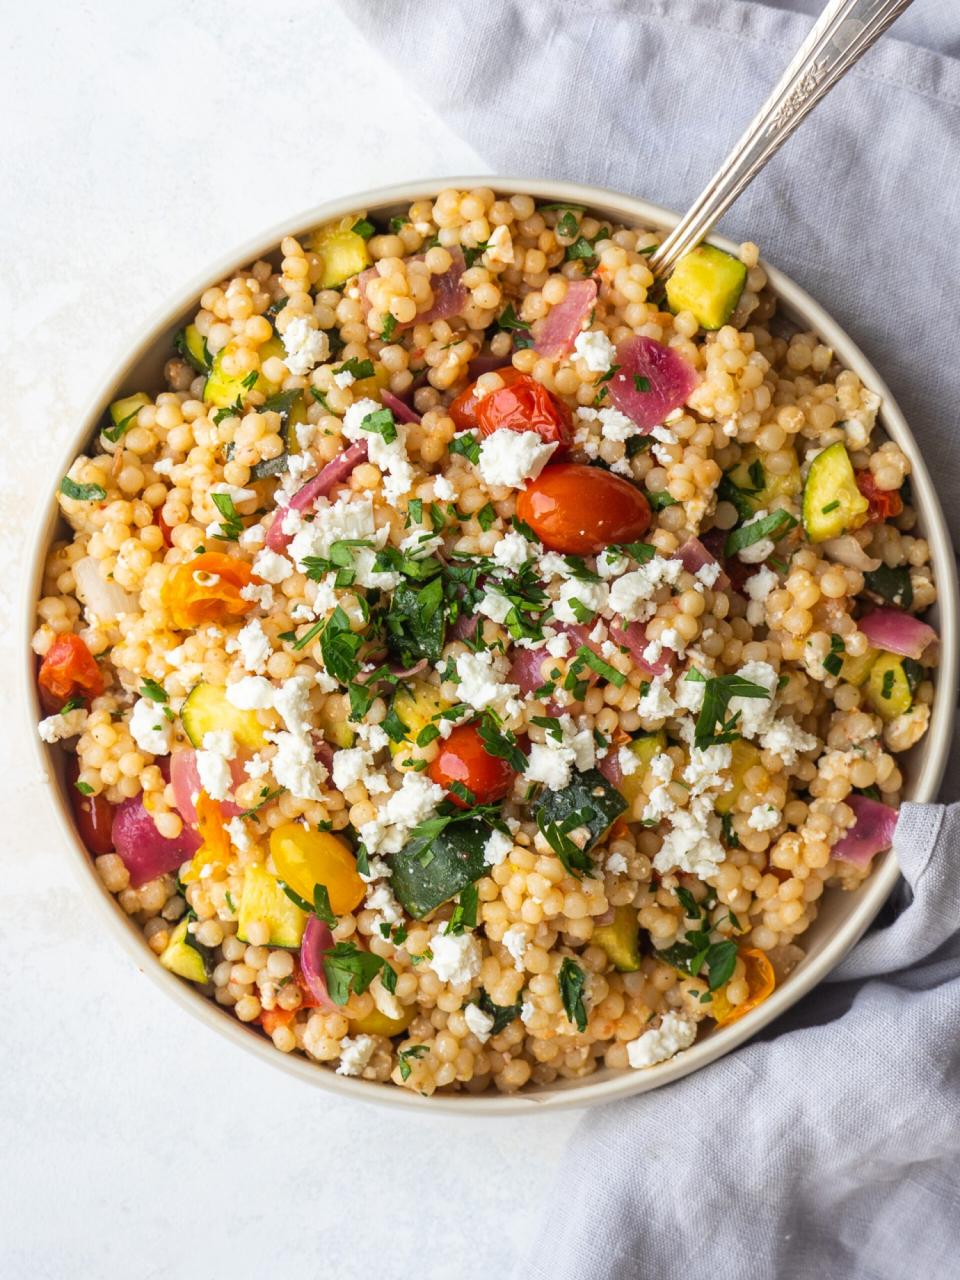 Couscous Salad Recipe made with Roasted Veggies and Pearl Couscous